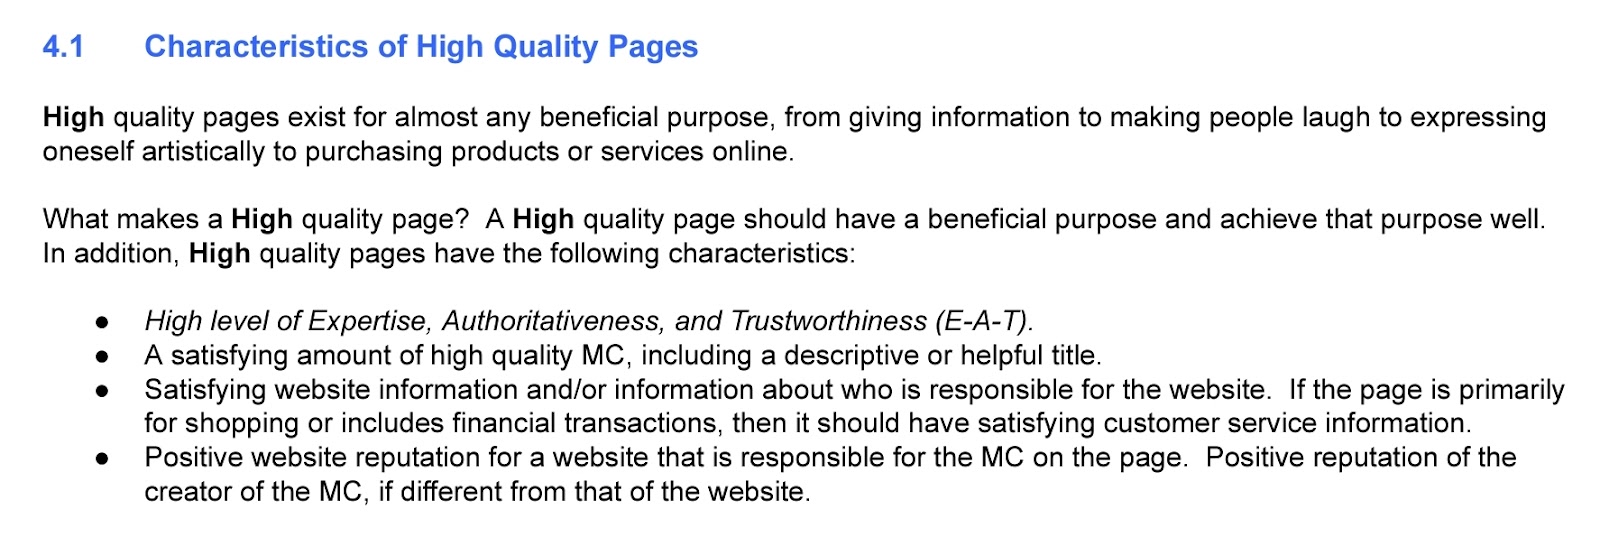 Google search quality evaluator guidelines on the characteristics of high quality pages